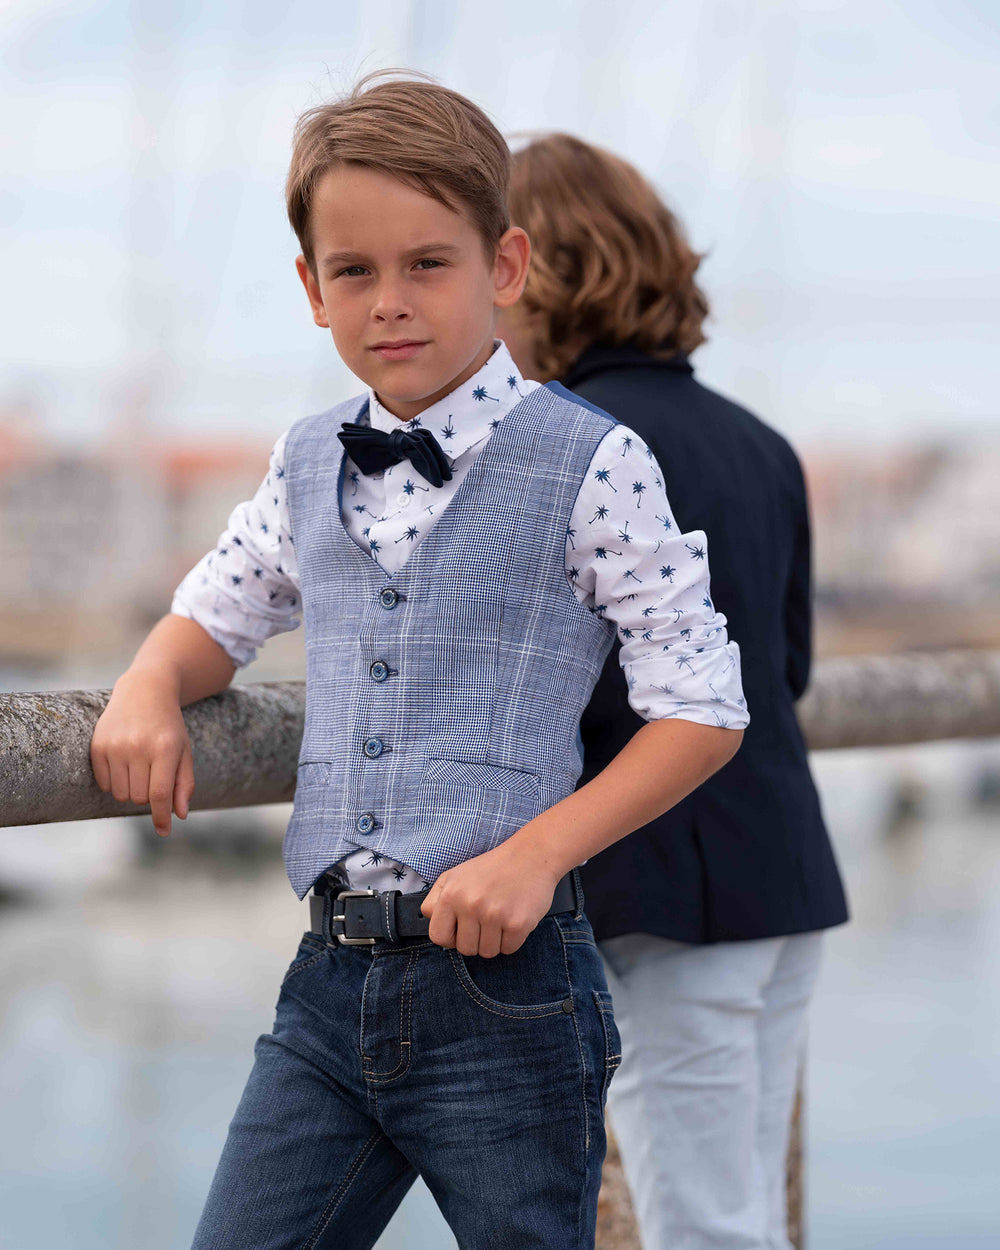 Classic jeans look with bow tie and white patterned shirt